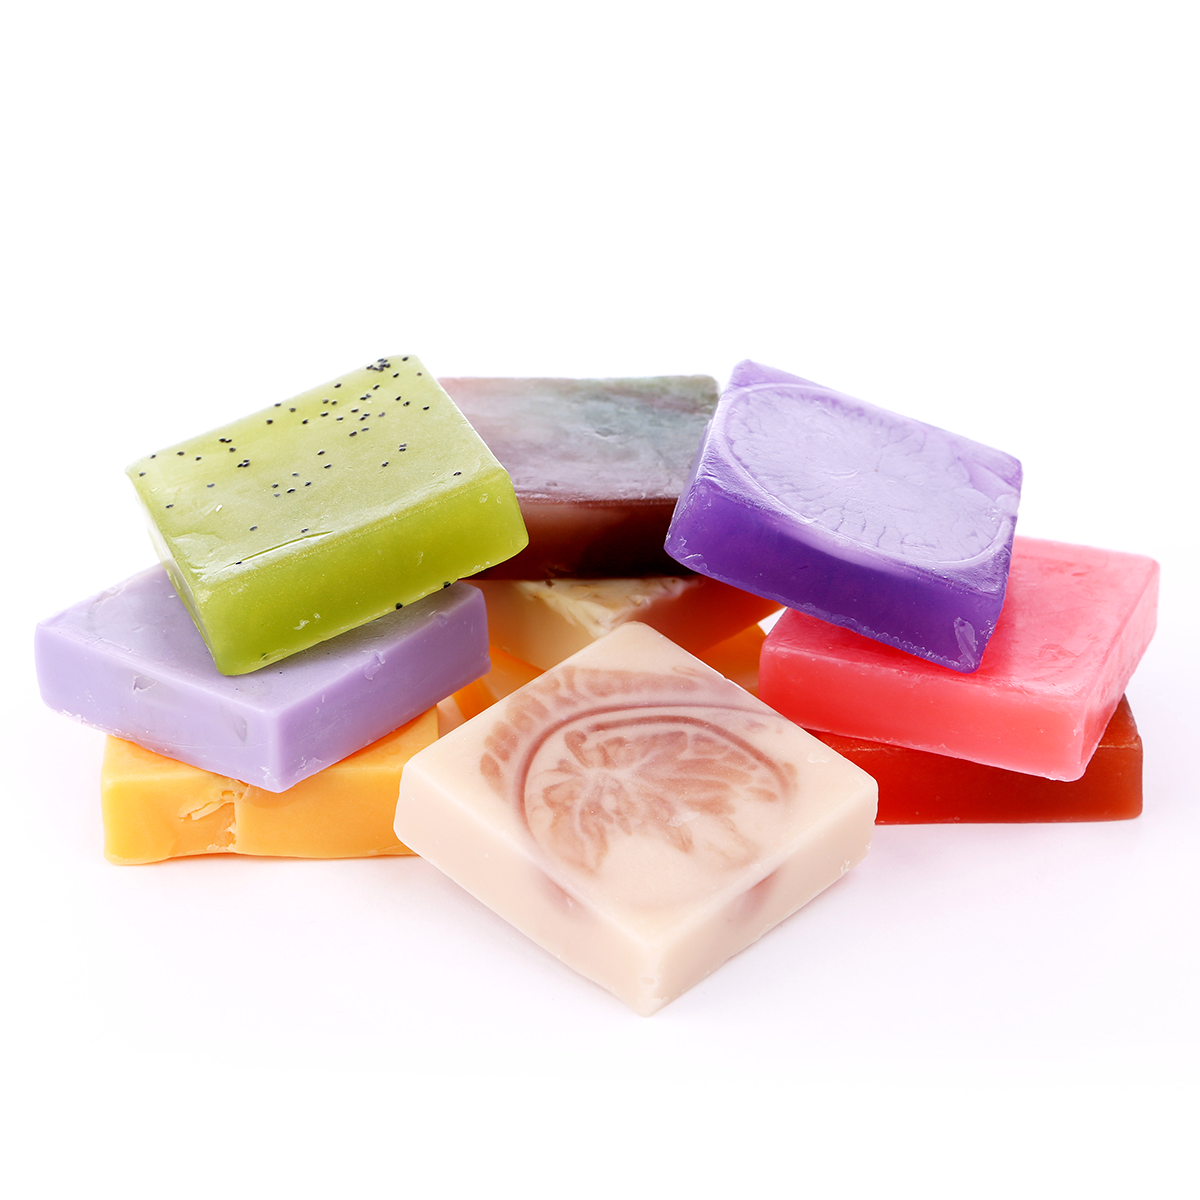 SaavyNaturals Products SoapStacked 3 ?v=1465922259